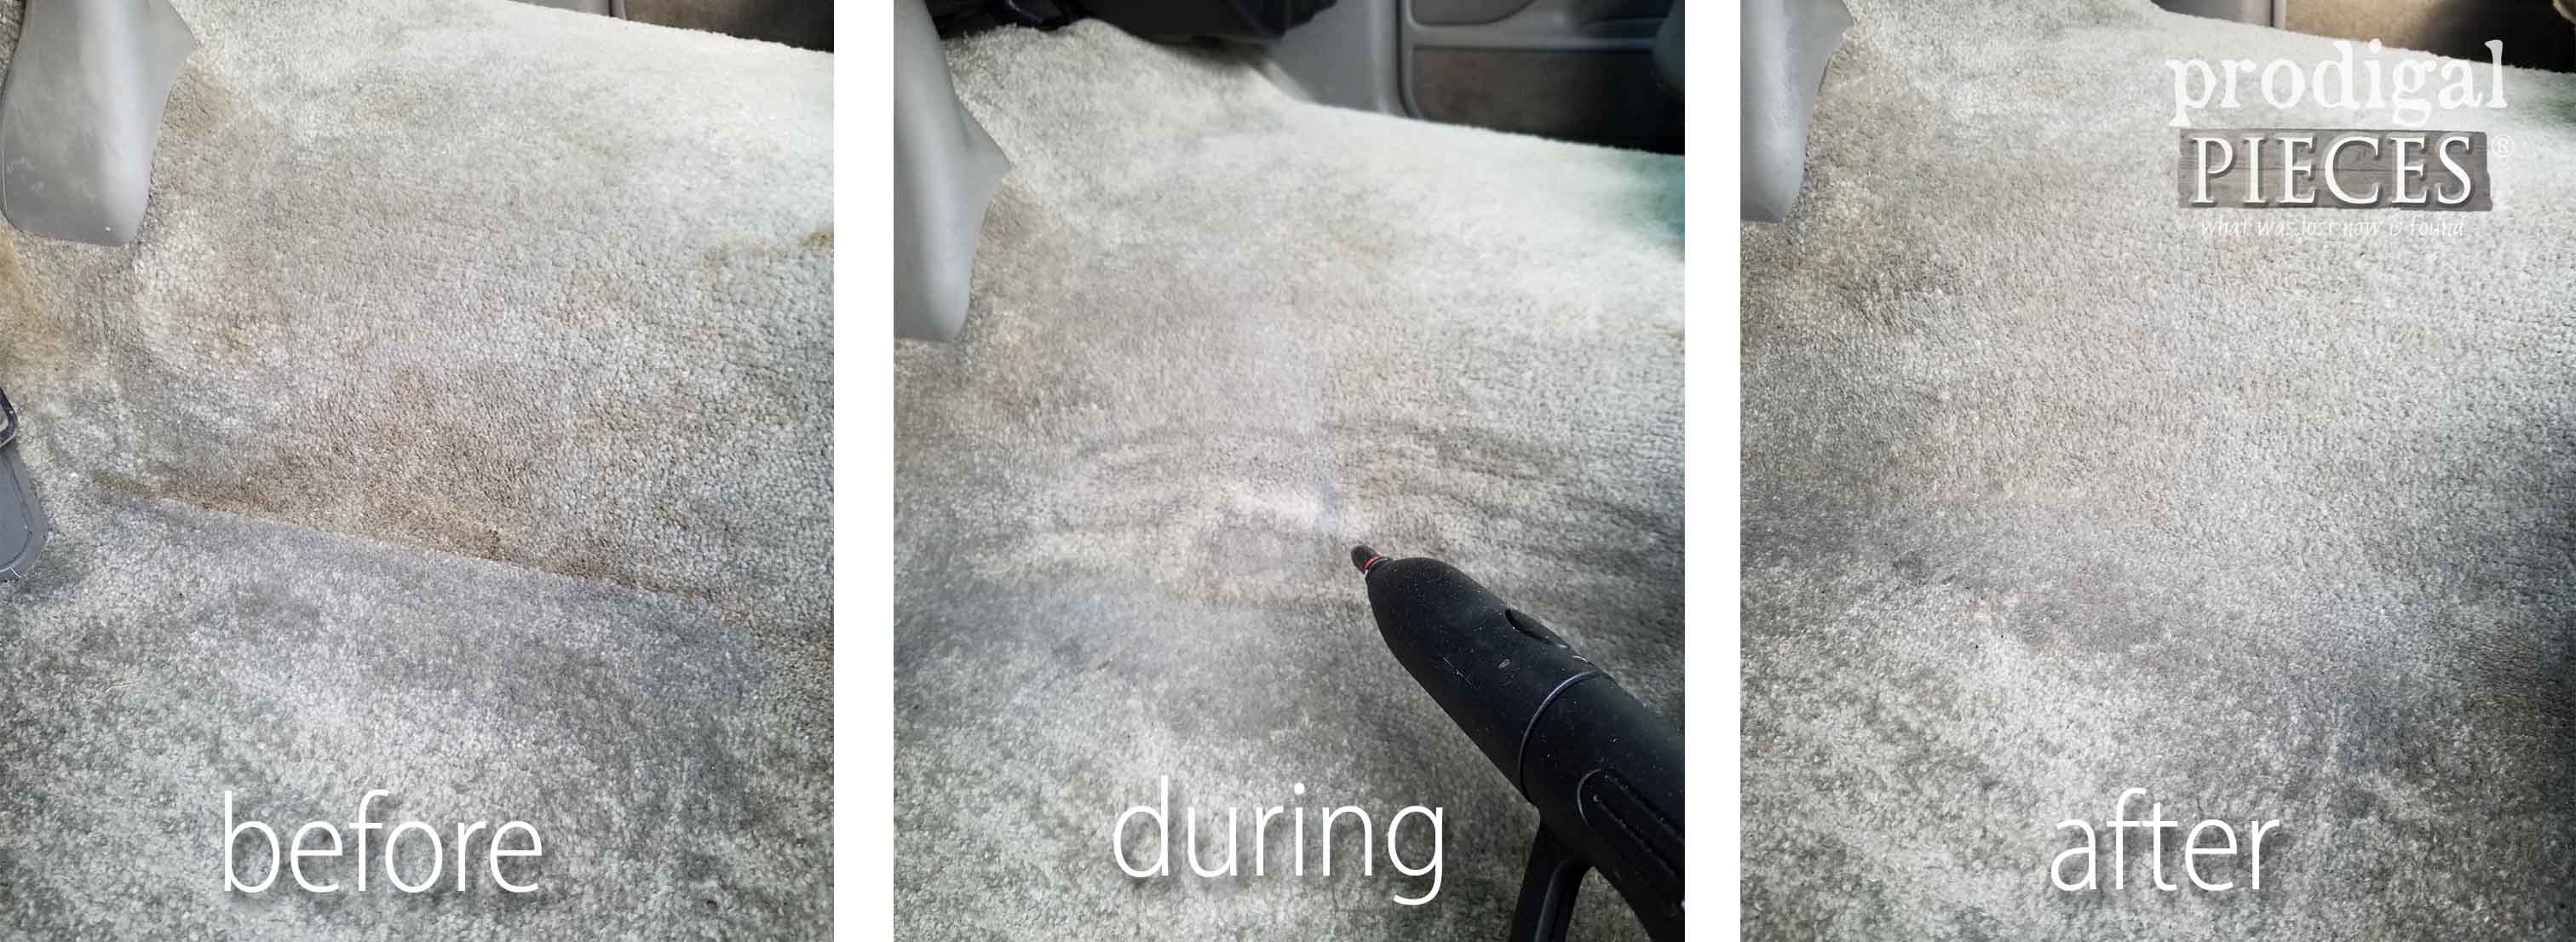 Cleaning Steps to get your car winter-ready by Prodigal Pieces | prodigalpieces.com